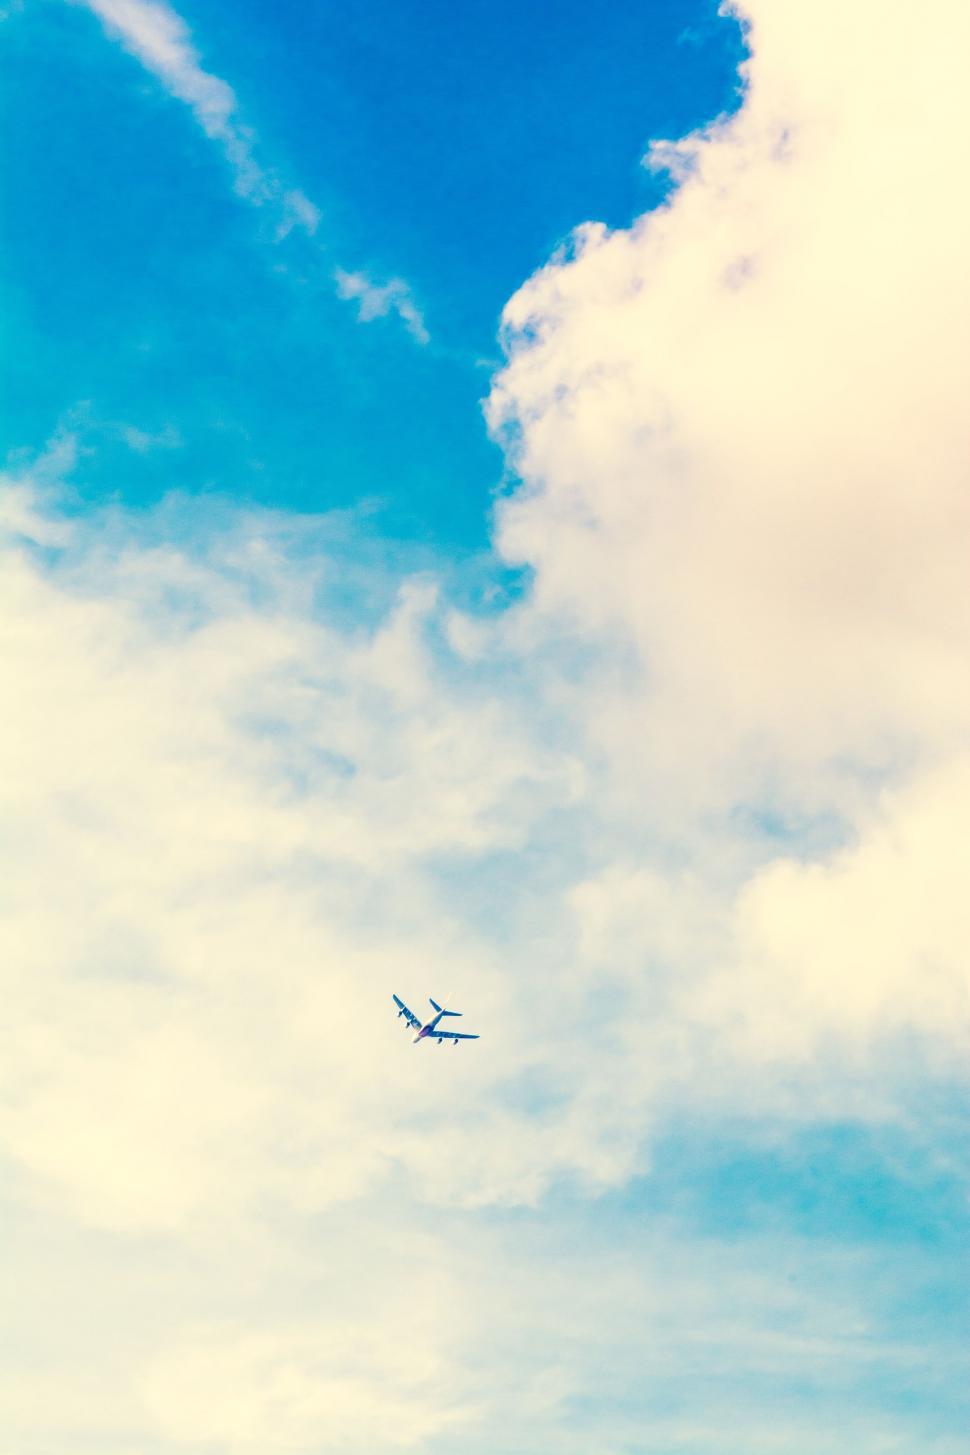 Free Image of Airplane Flying Through Blue Sky 